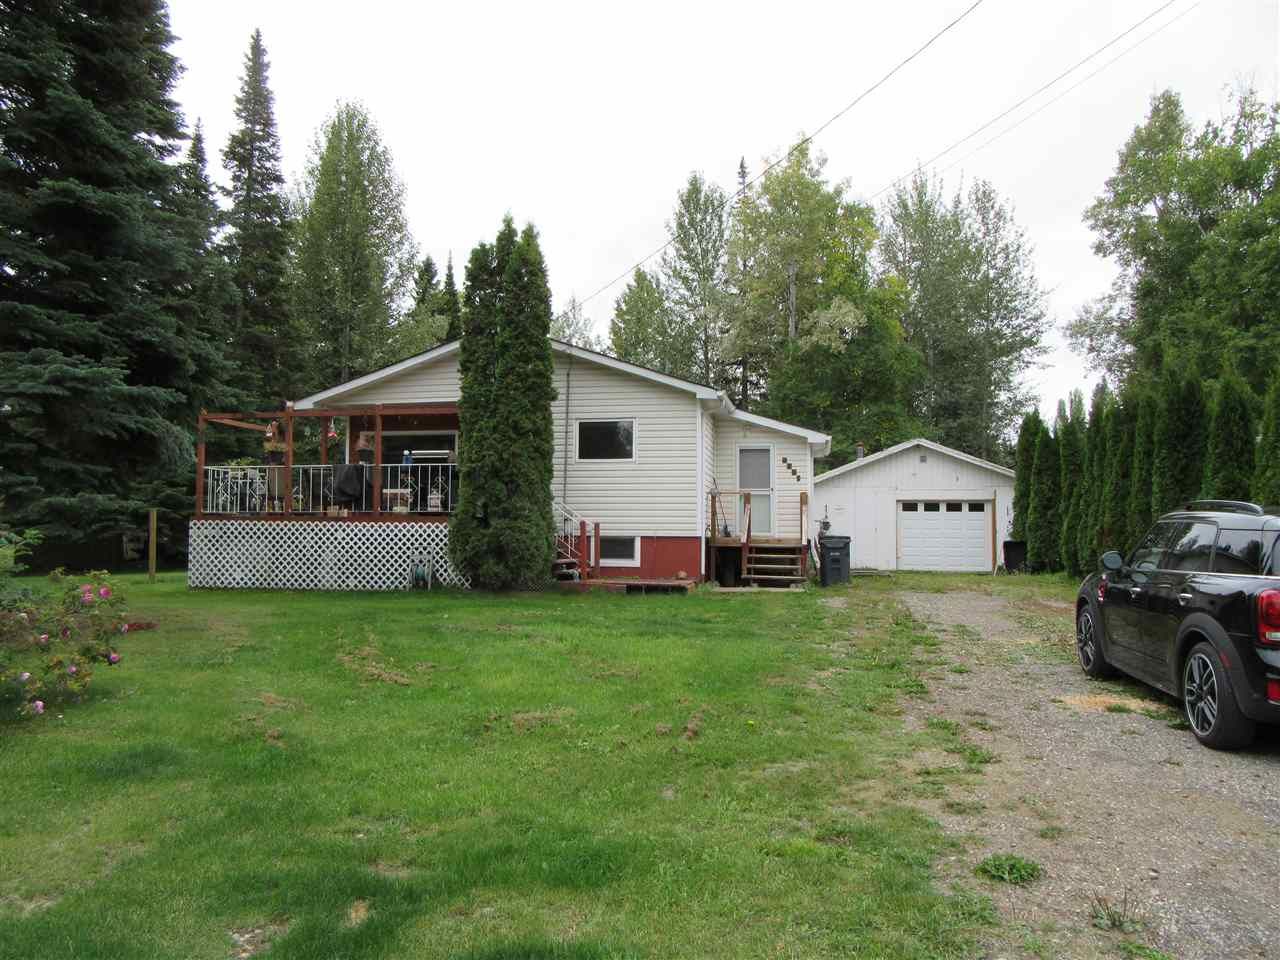 Main Photo: 4261 ARABIAN Road in Prince George: Emerald House for sale (PG City North (Zone 73))  : MLS®# R2404002